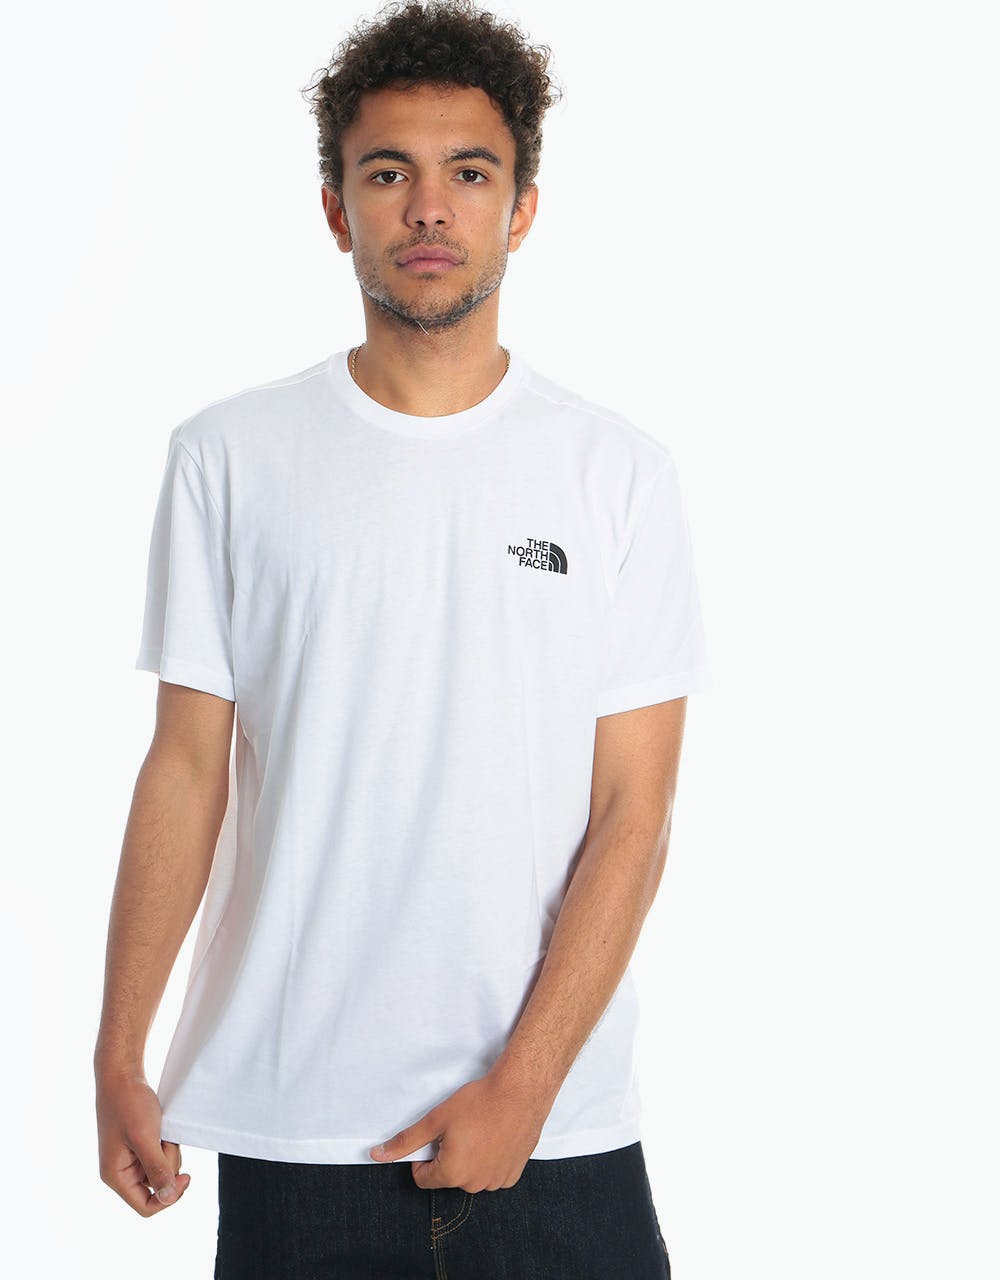 The North Face S/S Simple Dome T-Shirt - White